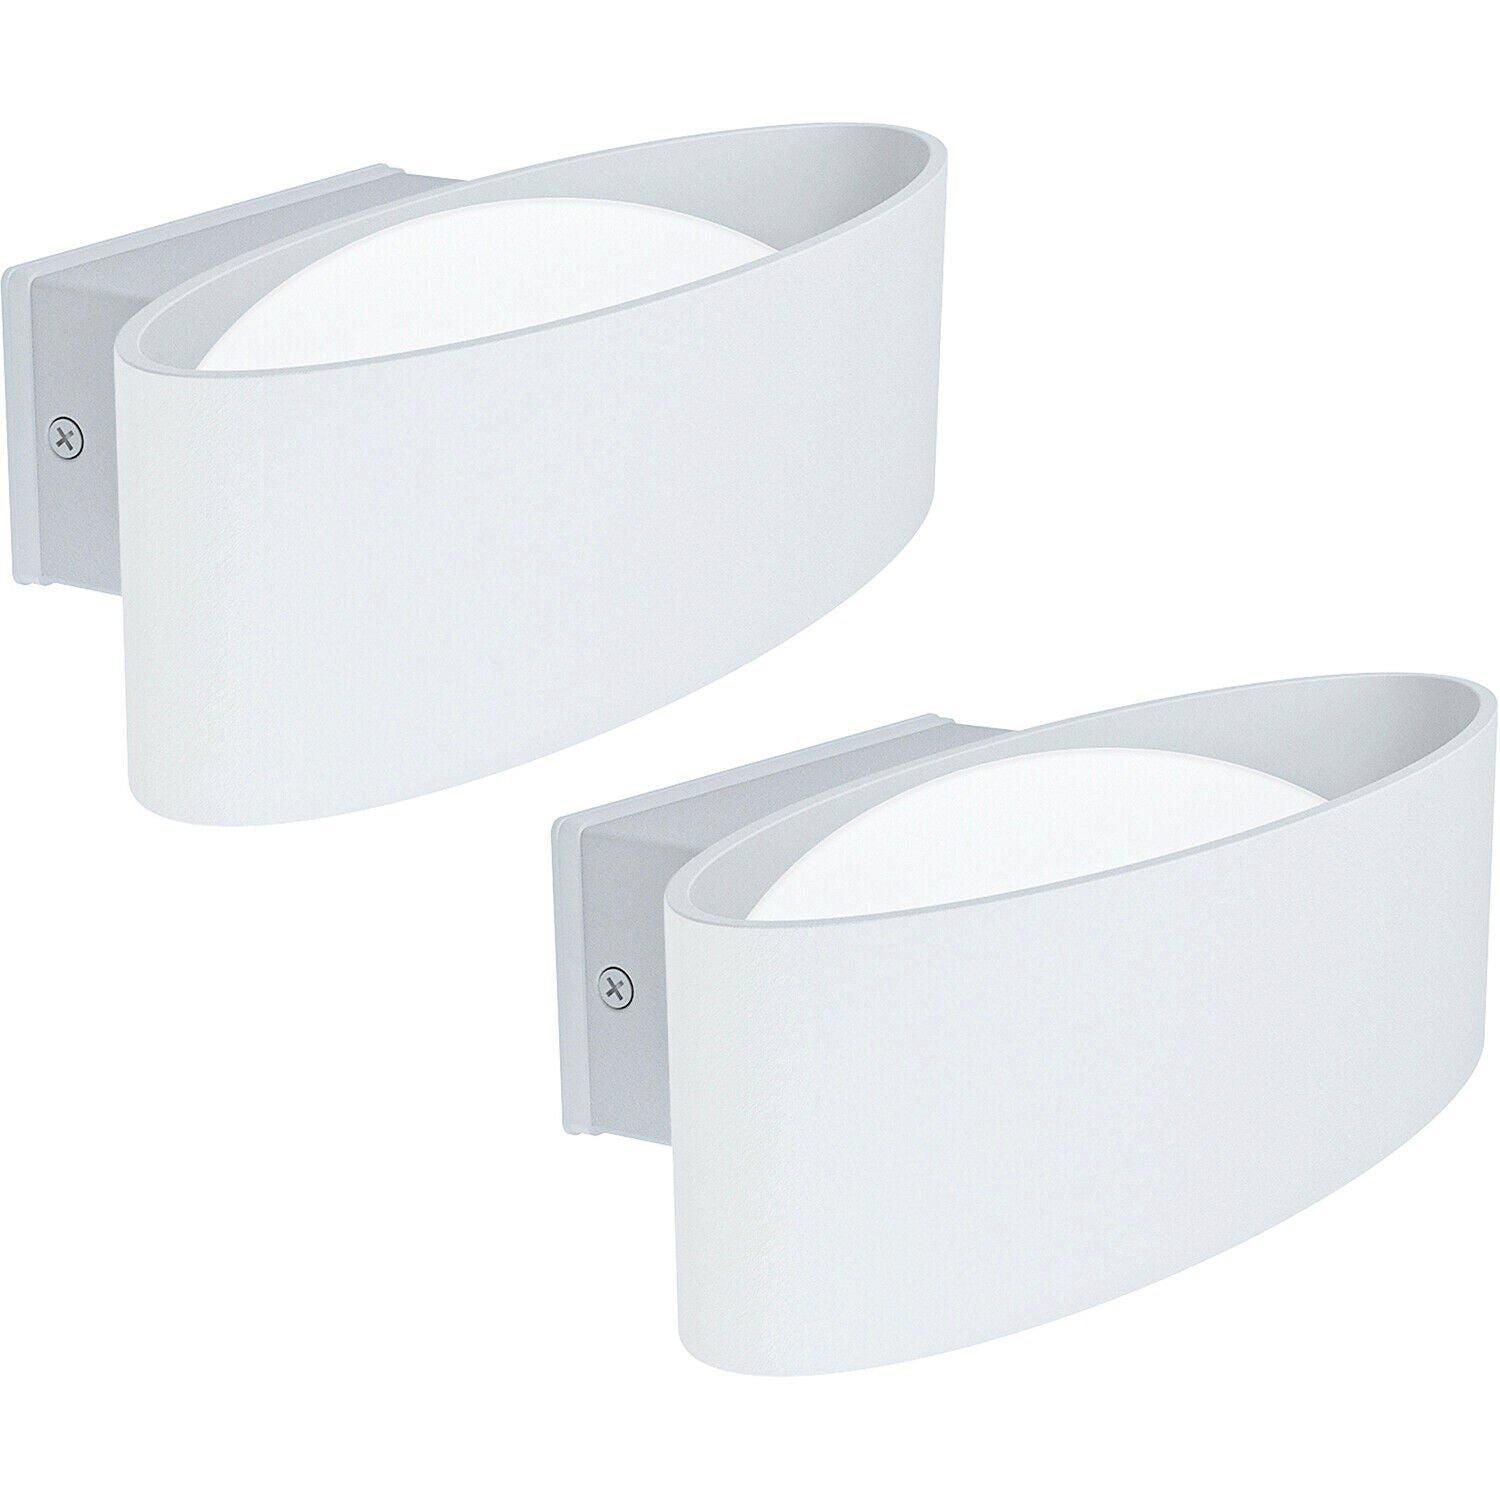 2 PACK IP44 Outdoor Wall Light White Aluminium & Steel 10W LED Porch Lamp